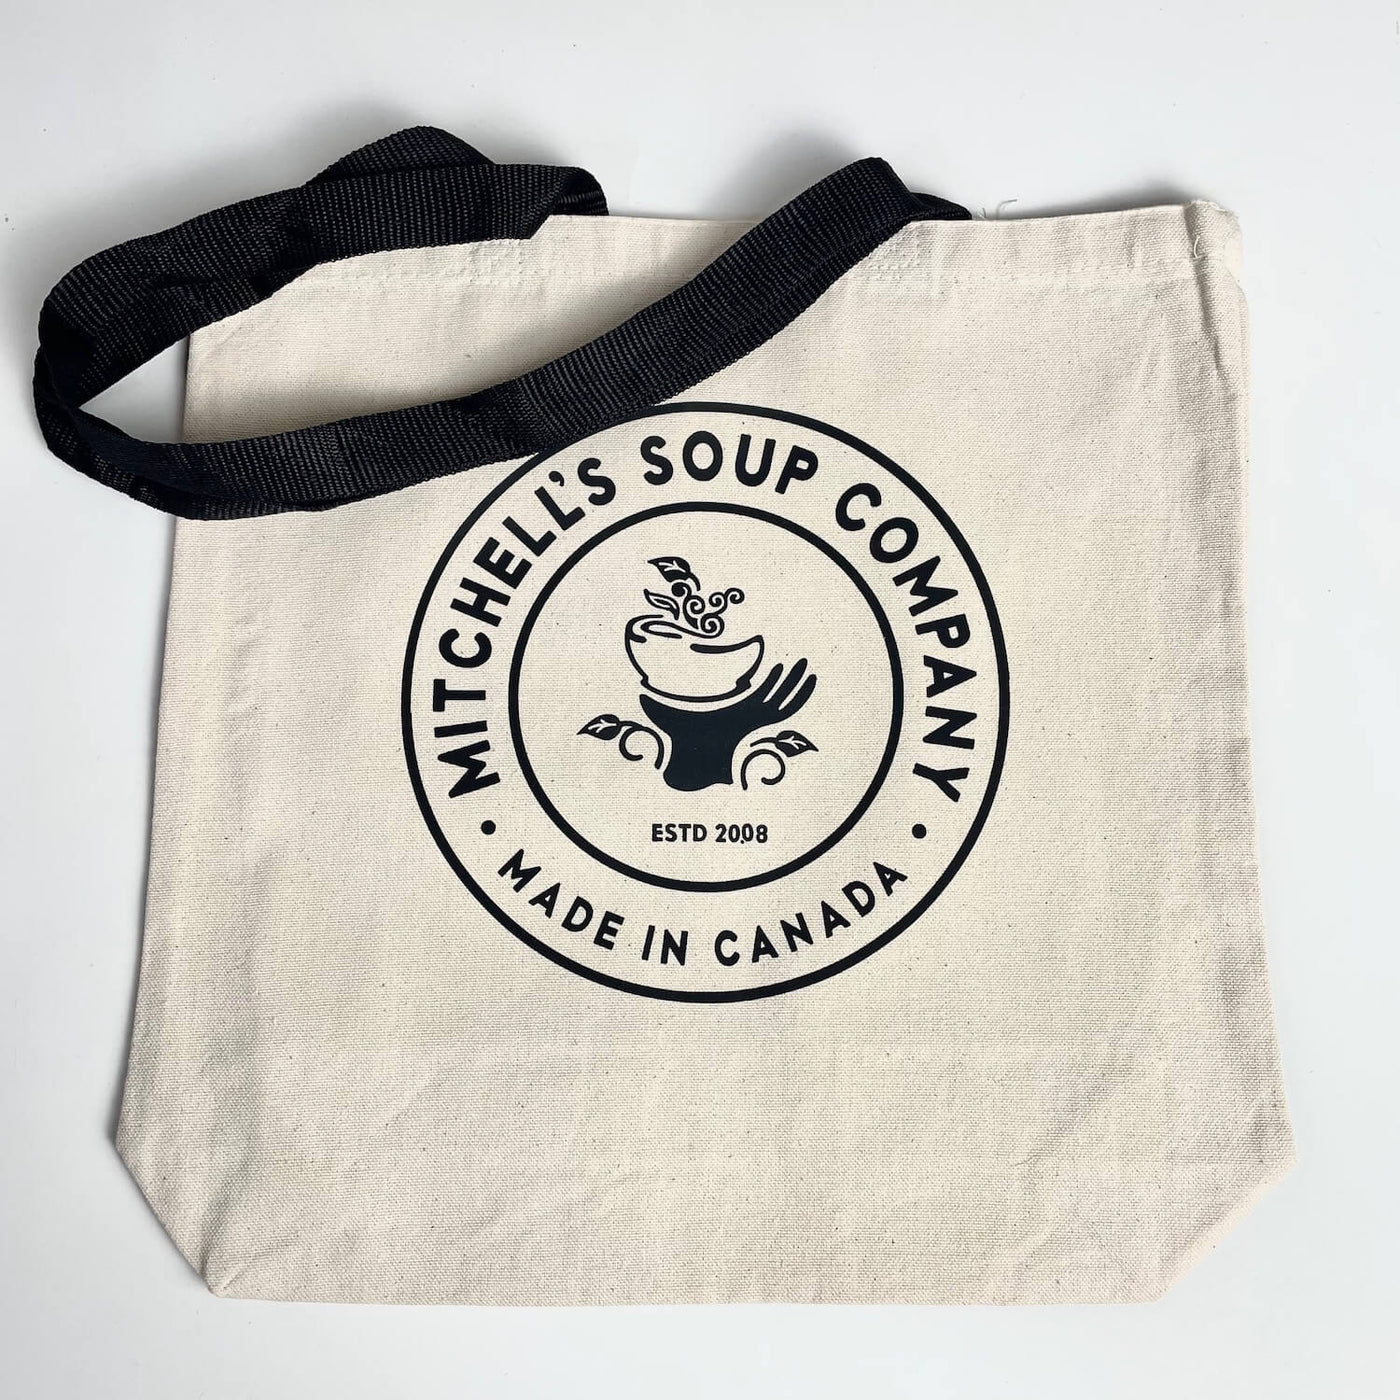 Mitchells Soup Co. Tote Bag - Natural with Black Straps